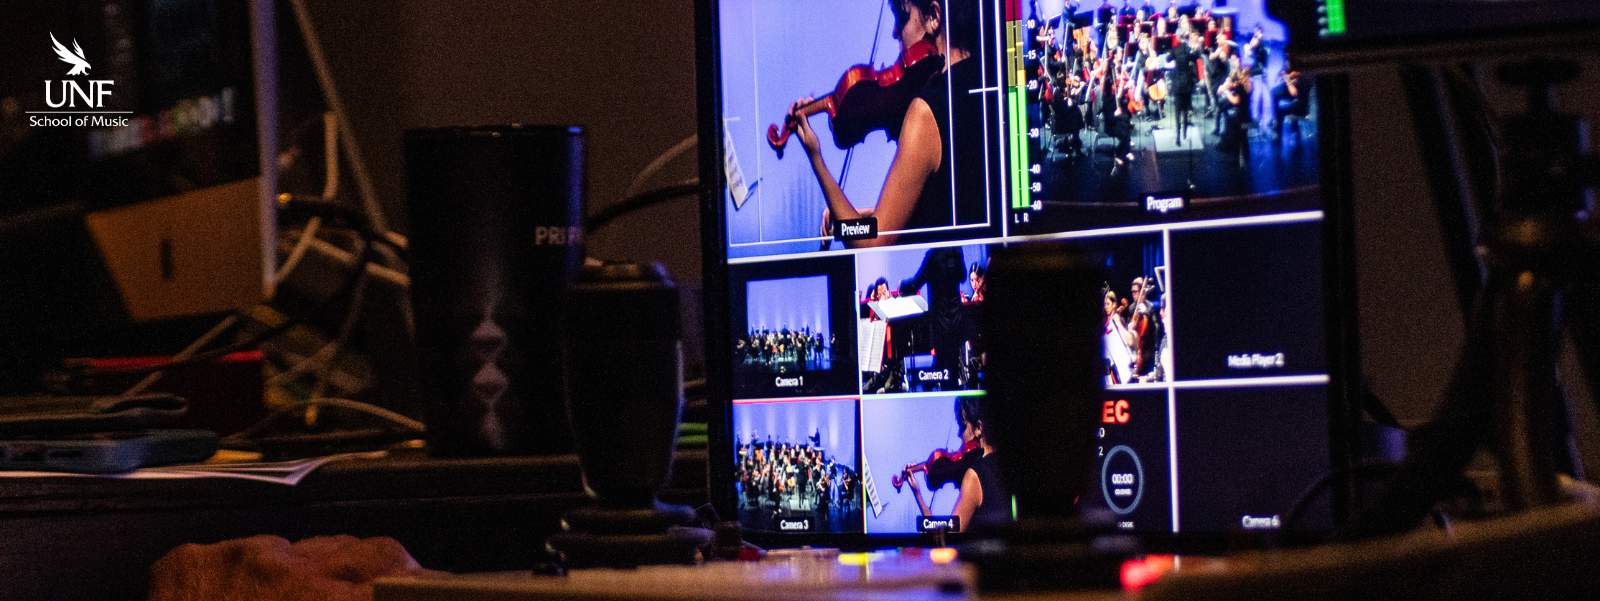 Stacked video monitors with images of orchestra players.